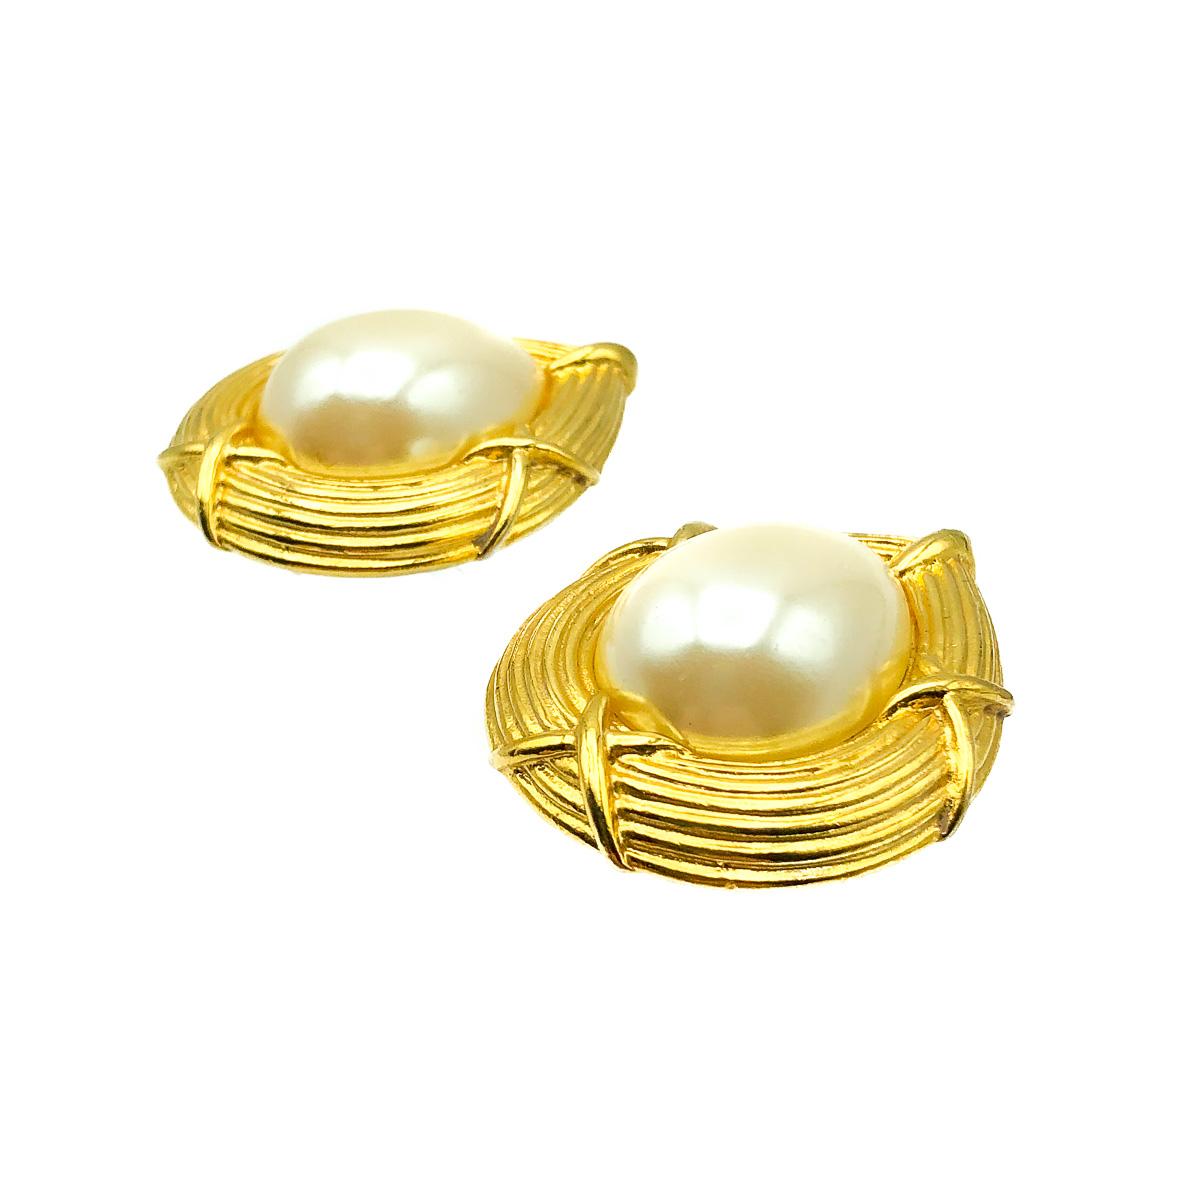 A Pearl Teardrop Kiss Earring. A striking gallery, ribbed and with criss-crossing, reminds us of kisses! Crafted in gold plated metal with a central large glass faux pearl. Wonderful quality. Very good vintage condition, 4cms. A stunning pair of